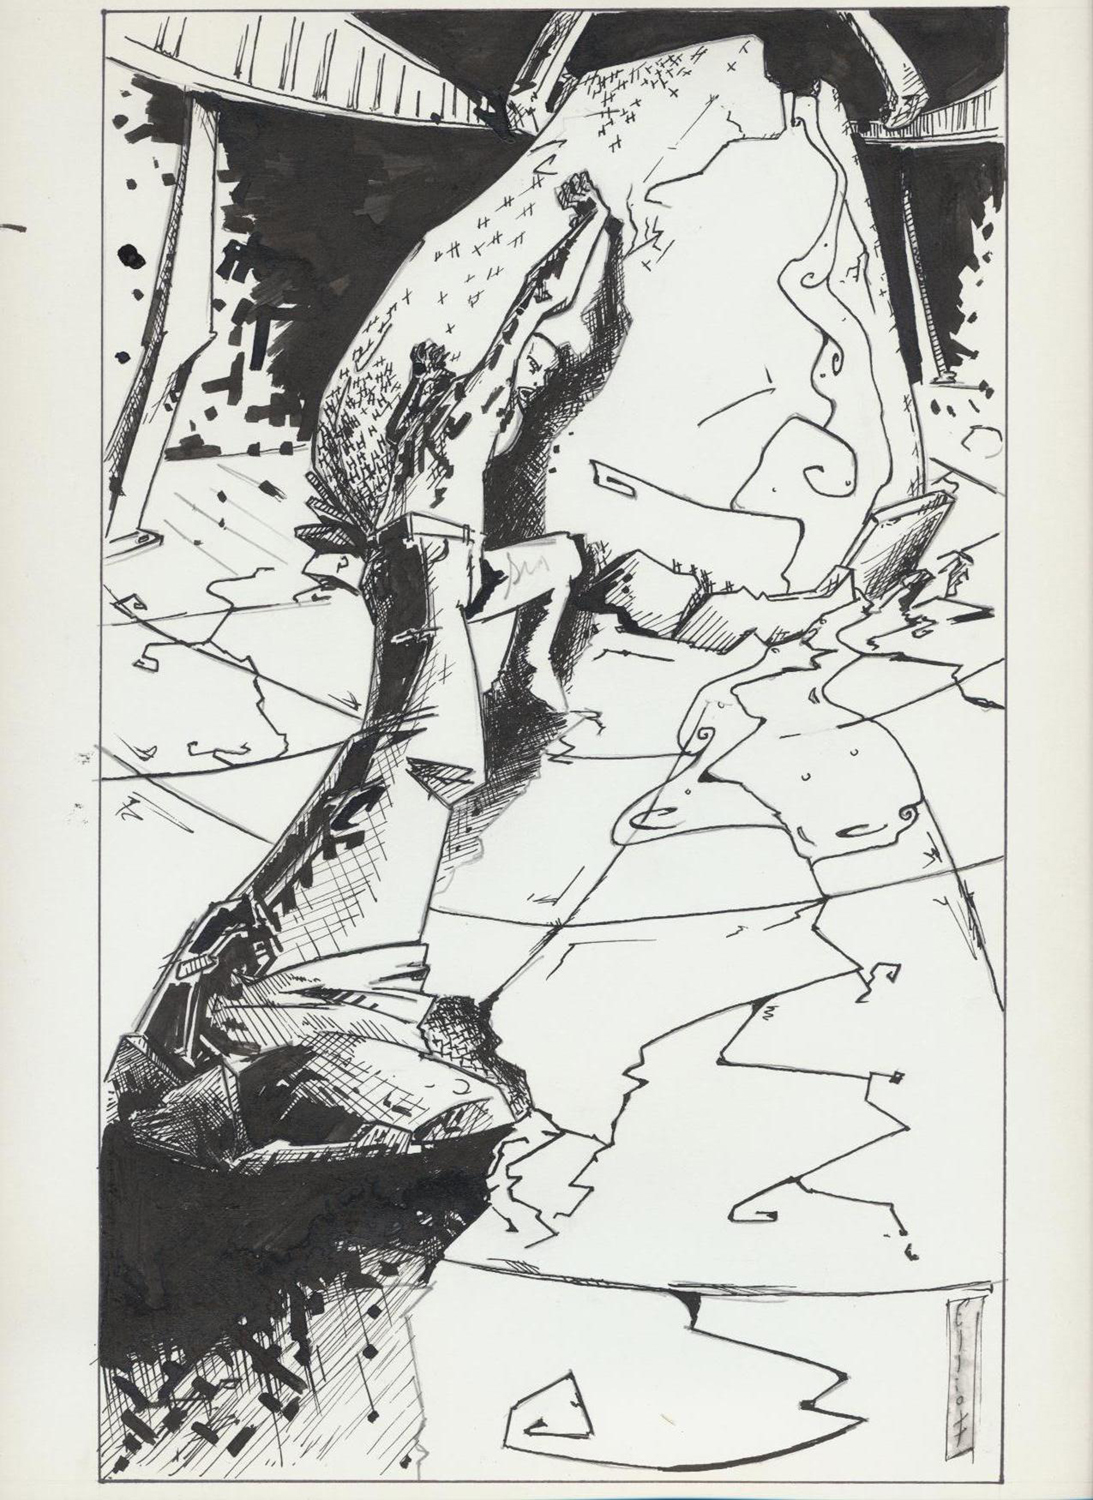 A black and white pen & ink drawing of Joe Magarac struggling to hold a molten crucible upright. Photo Credit: Lucas Elliott